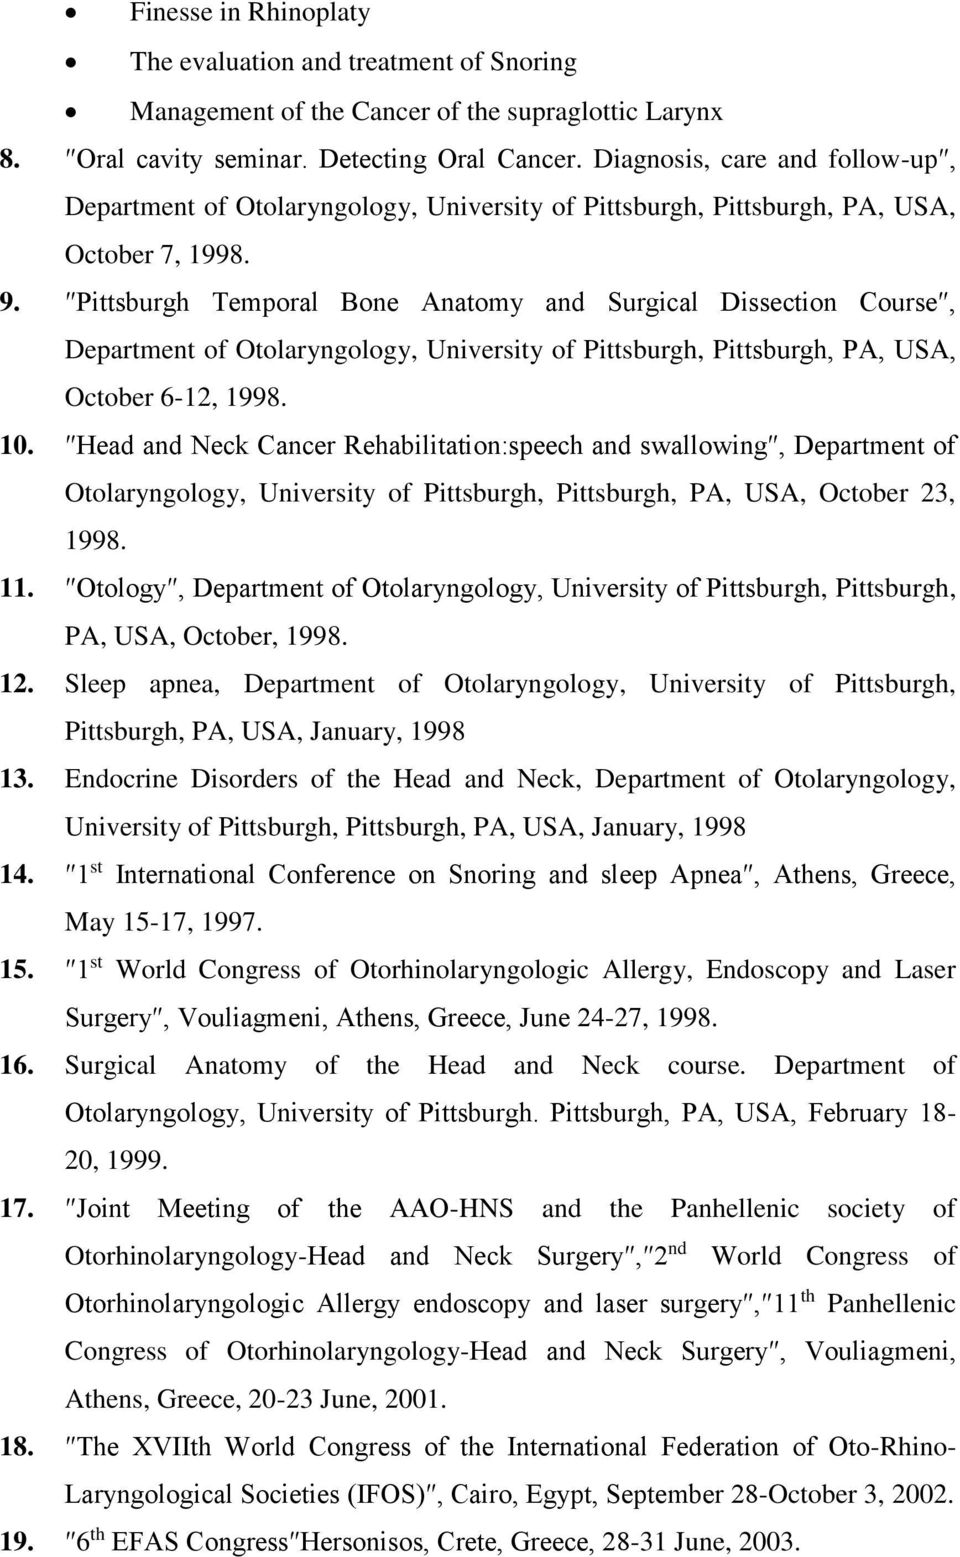 Pittsburgh Temporal Bone Anatomy and Surgical Dissection Course, Department of Otolaryngology, University of Pittsburgh, Pittsburgh, PΑ, USA, October 6-12, 1998. 10.